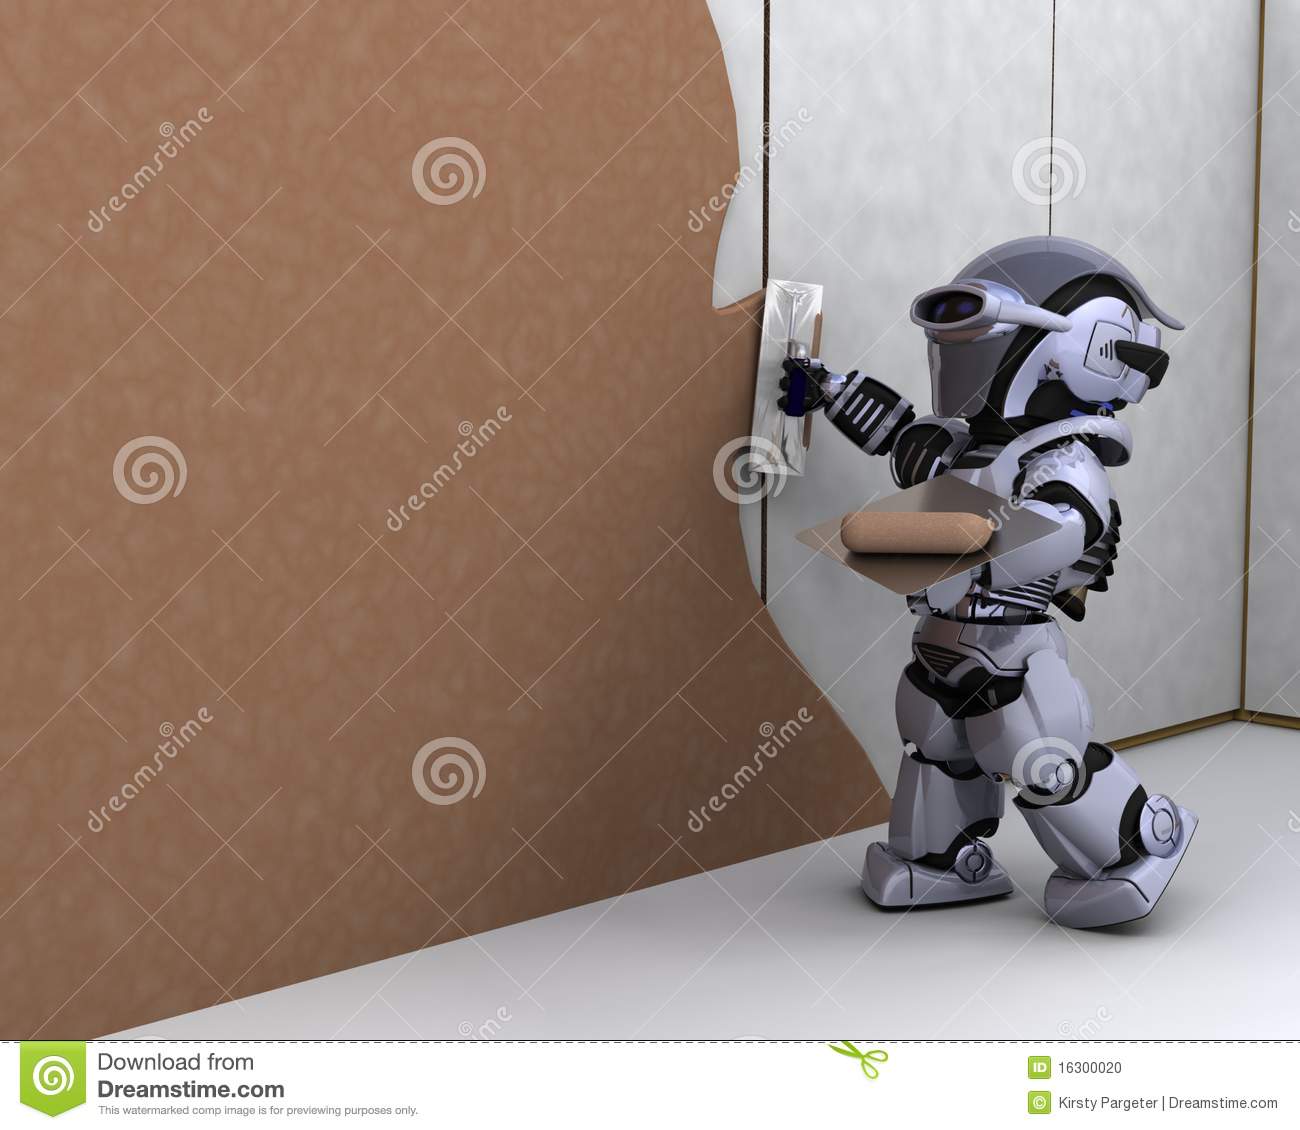 Robot Contractor Building A Drywall Stock Photo   Image  16300020